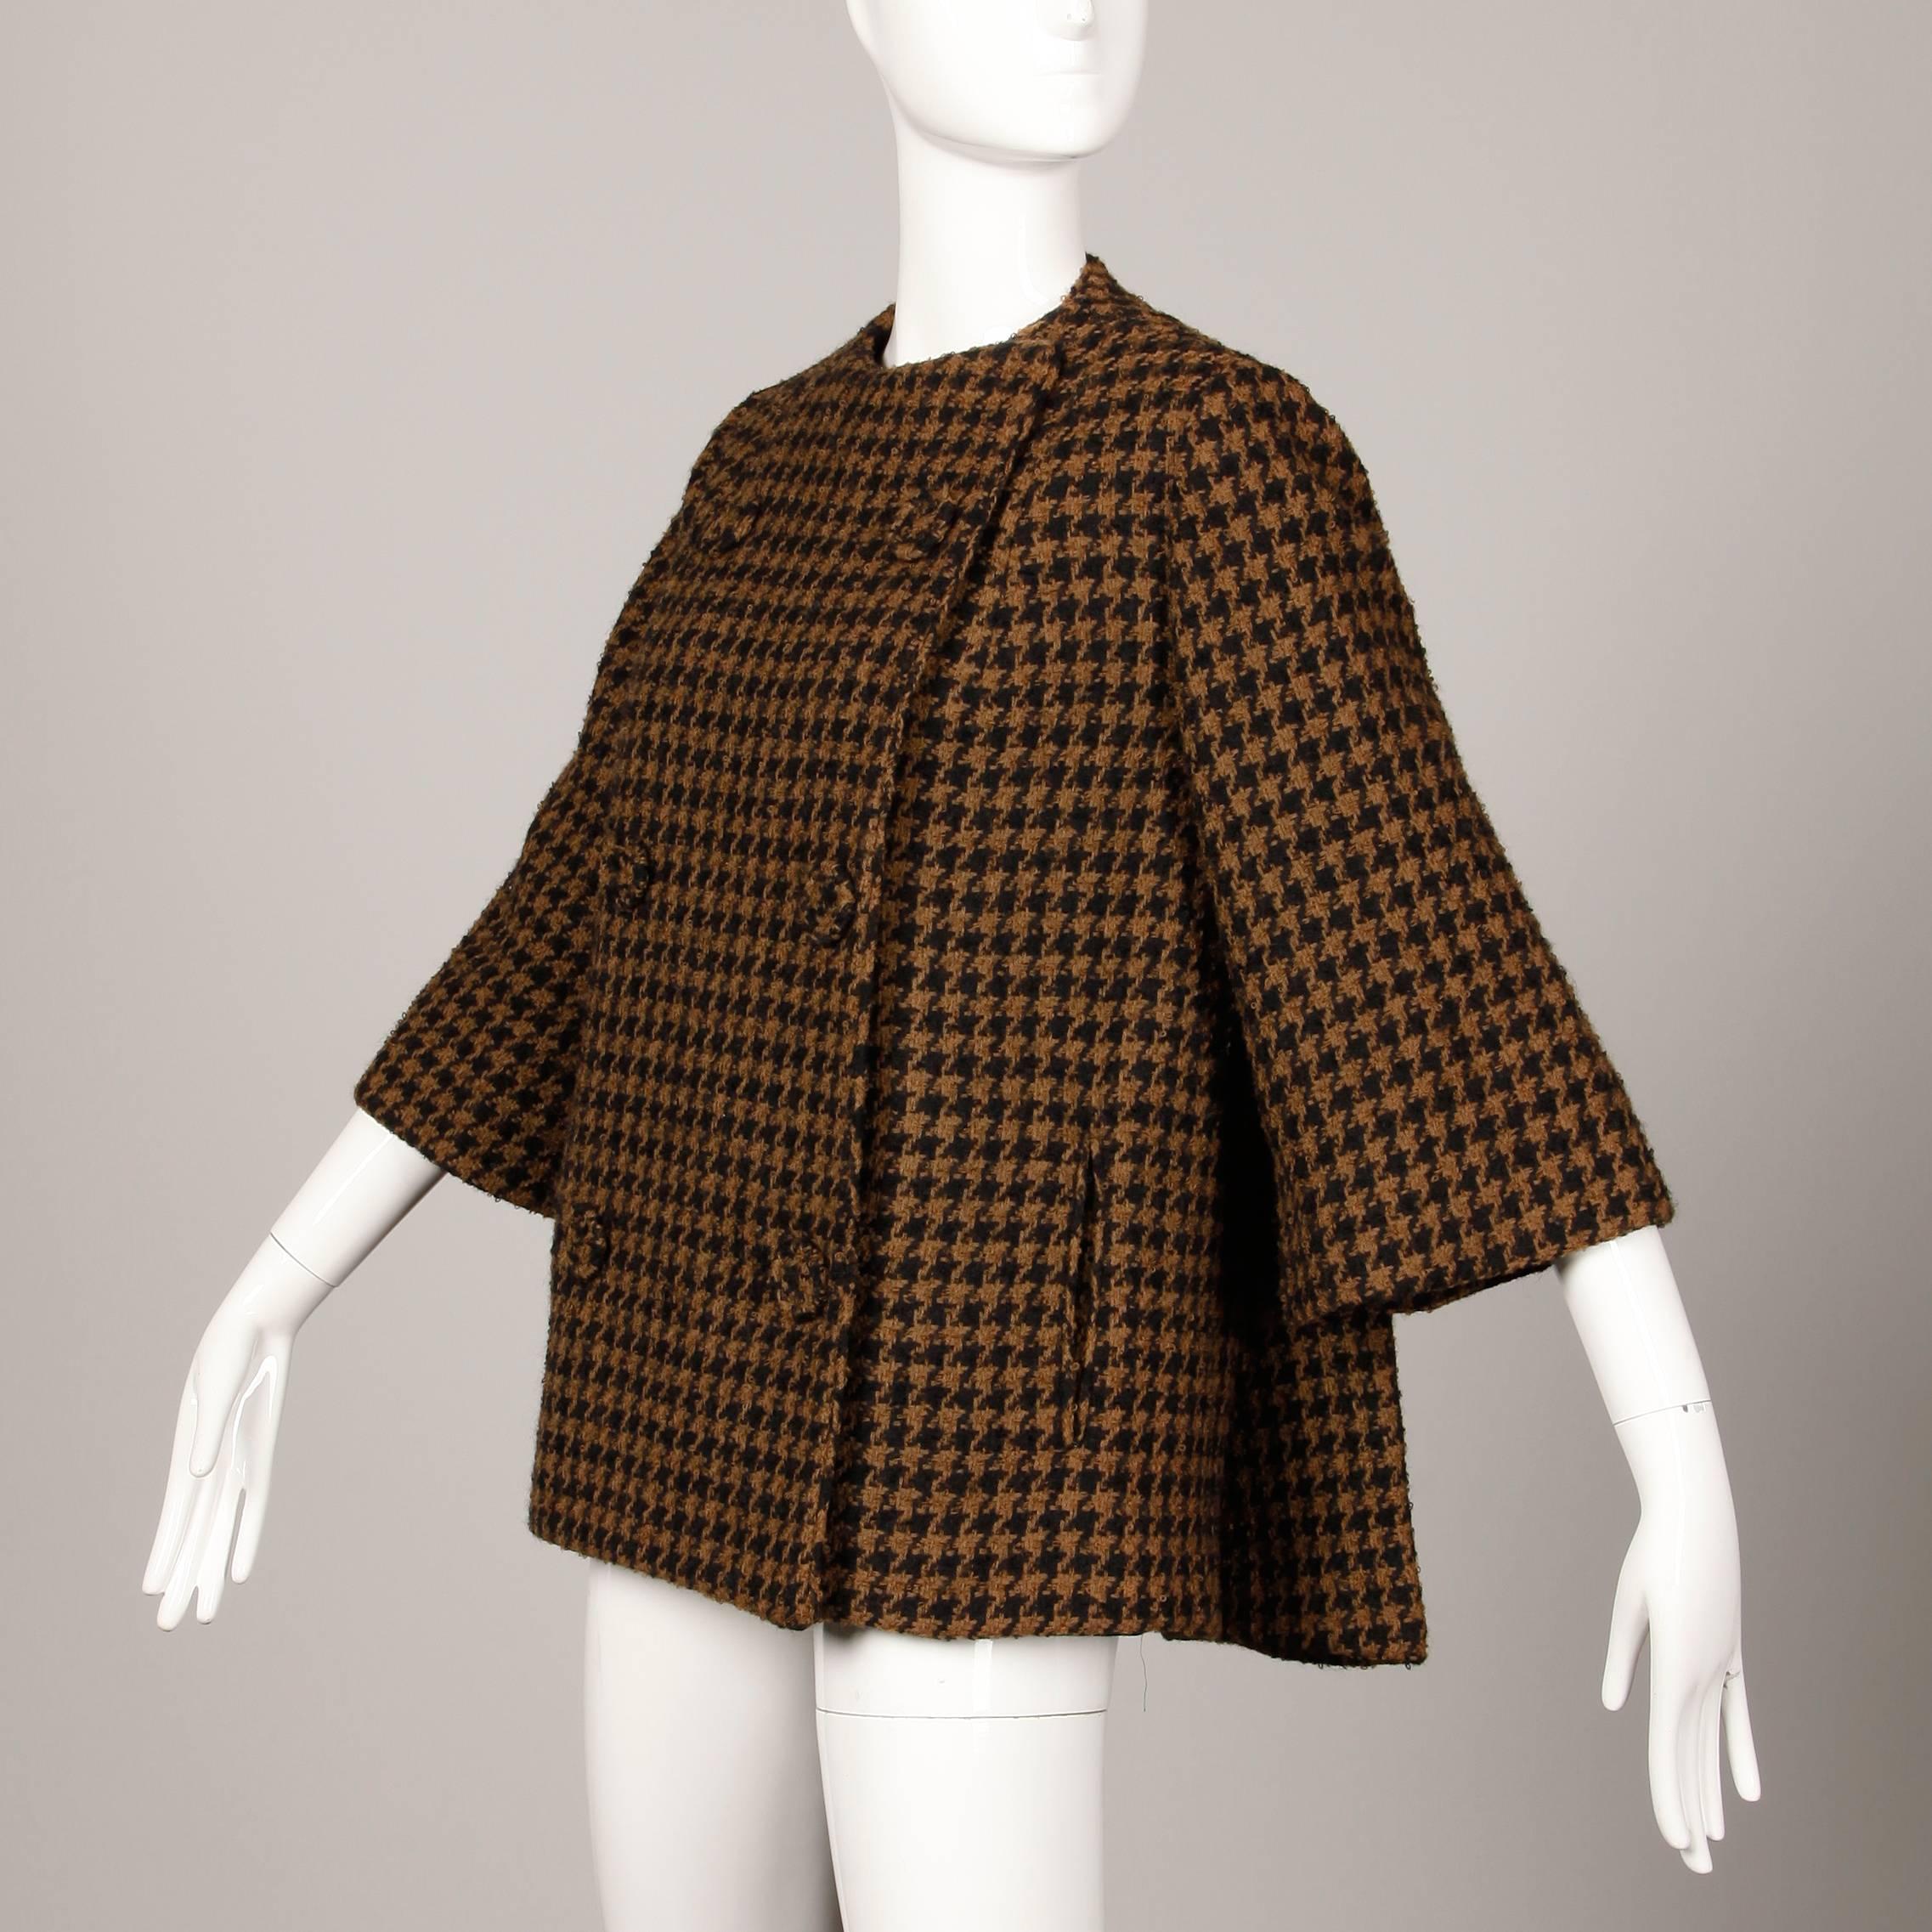 1960s Mr. Blackwell Custom Vintage Black + Brown Houndstooth Wool Jacket or Coat In Excellent Condition For Sale In Sparks, NV